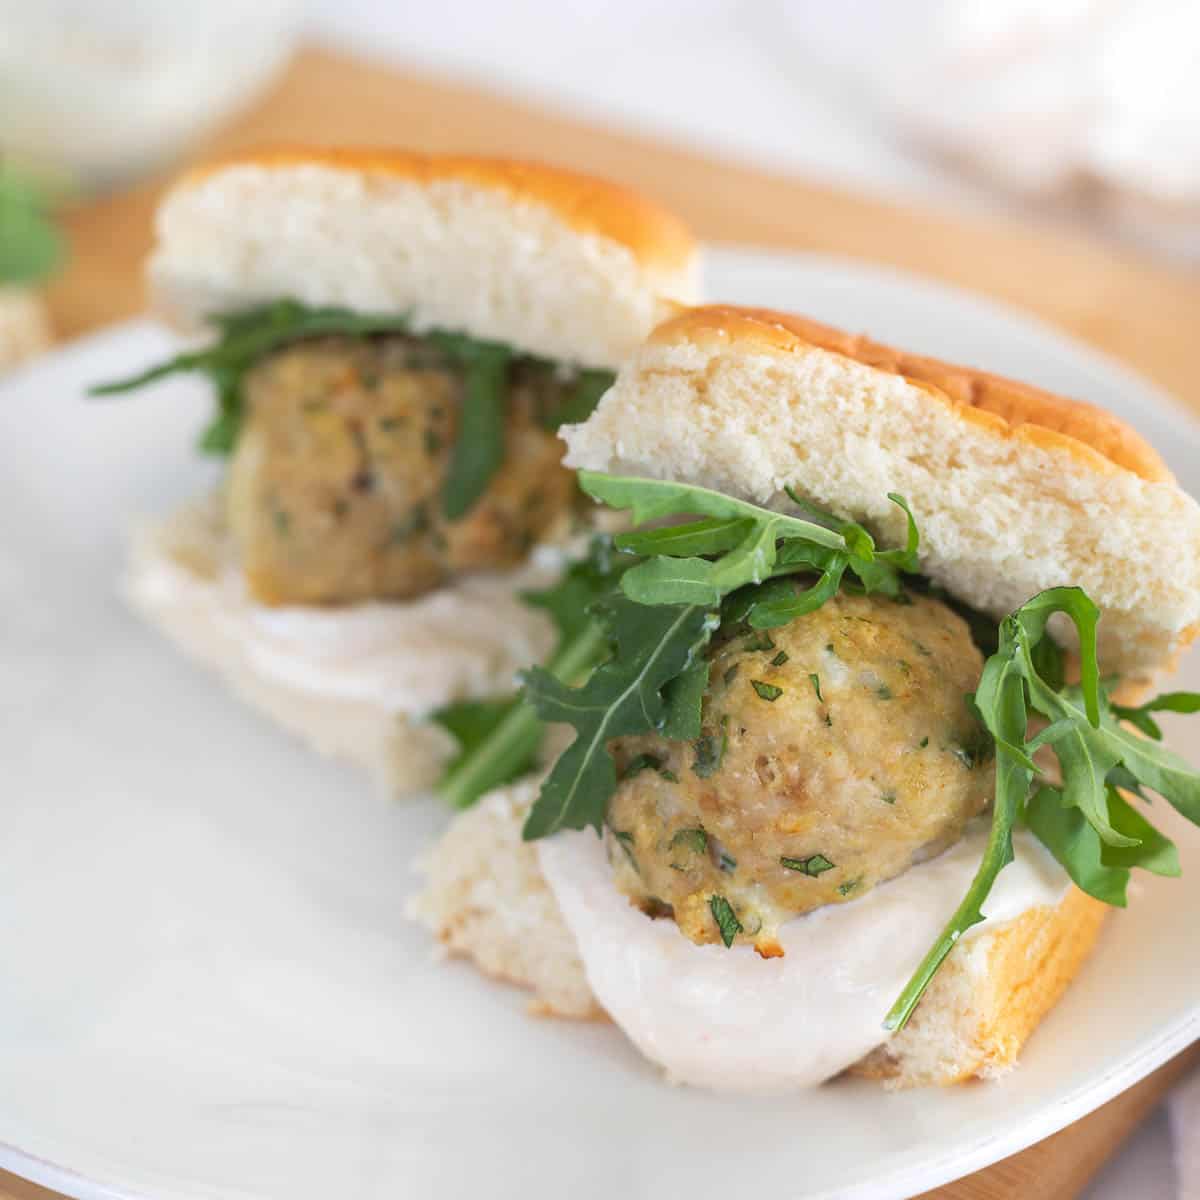 Two chicken meatball sliders on a white plate with arugula and yogurt sauce.